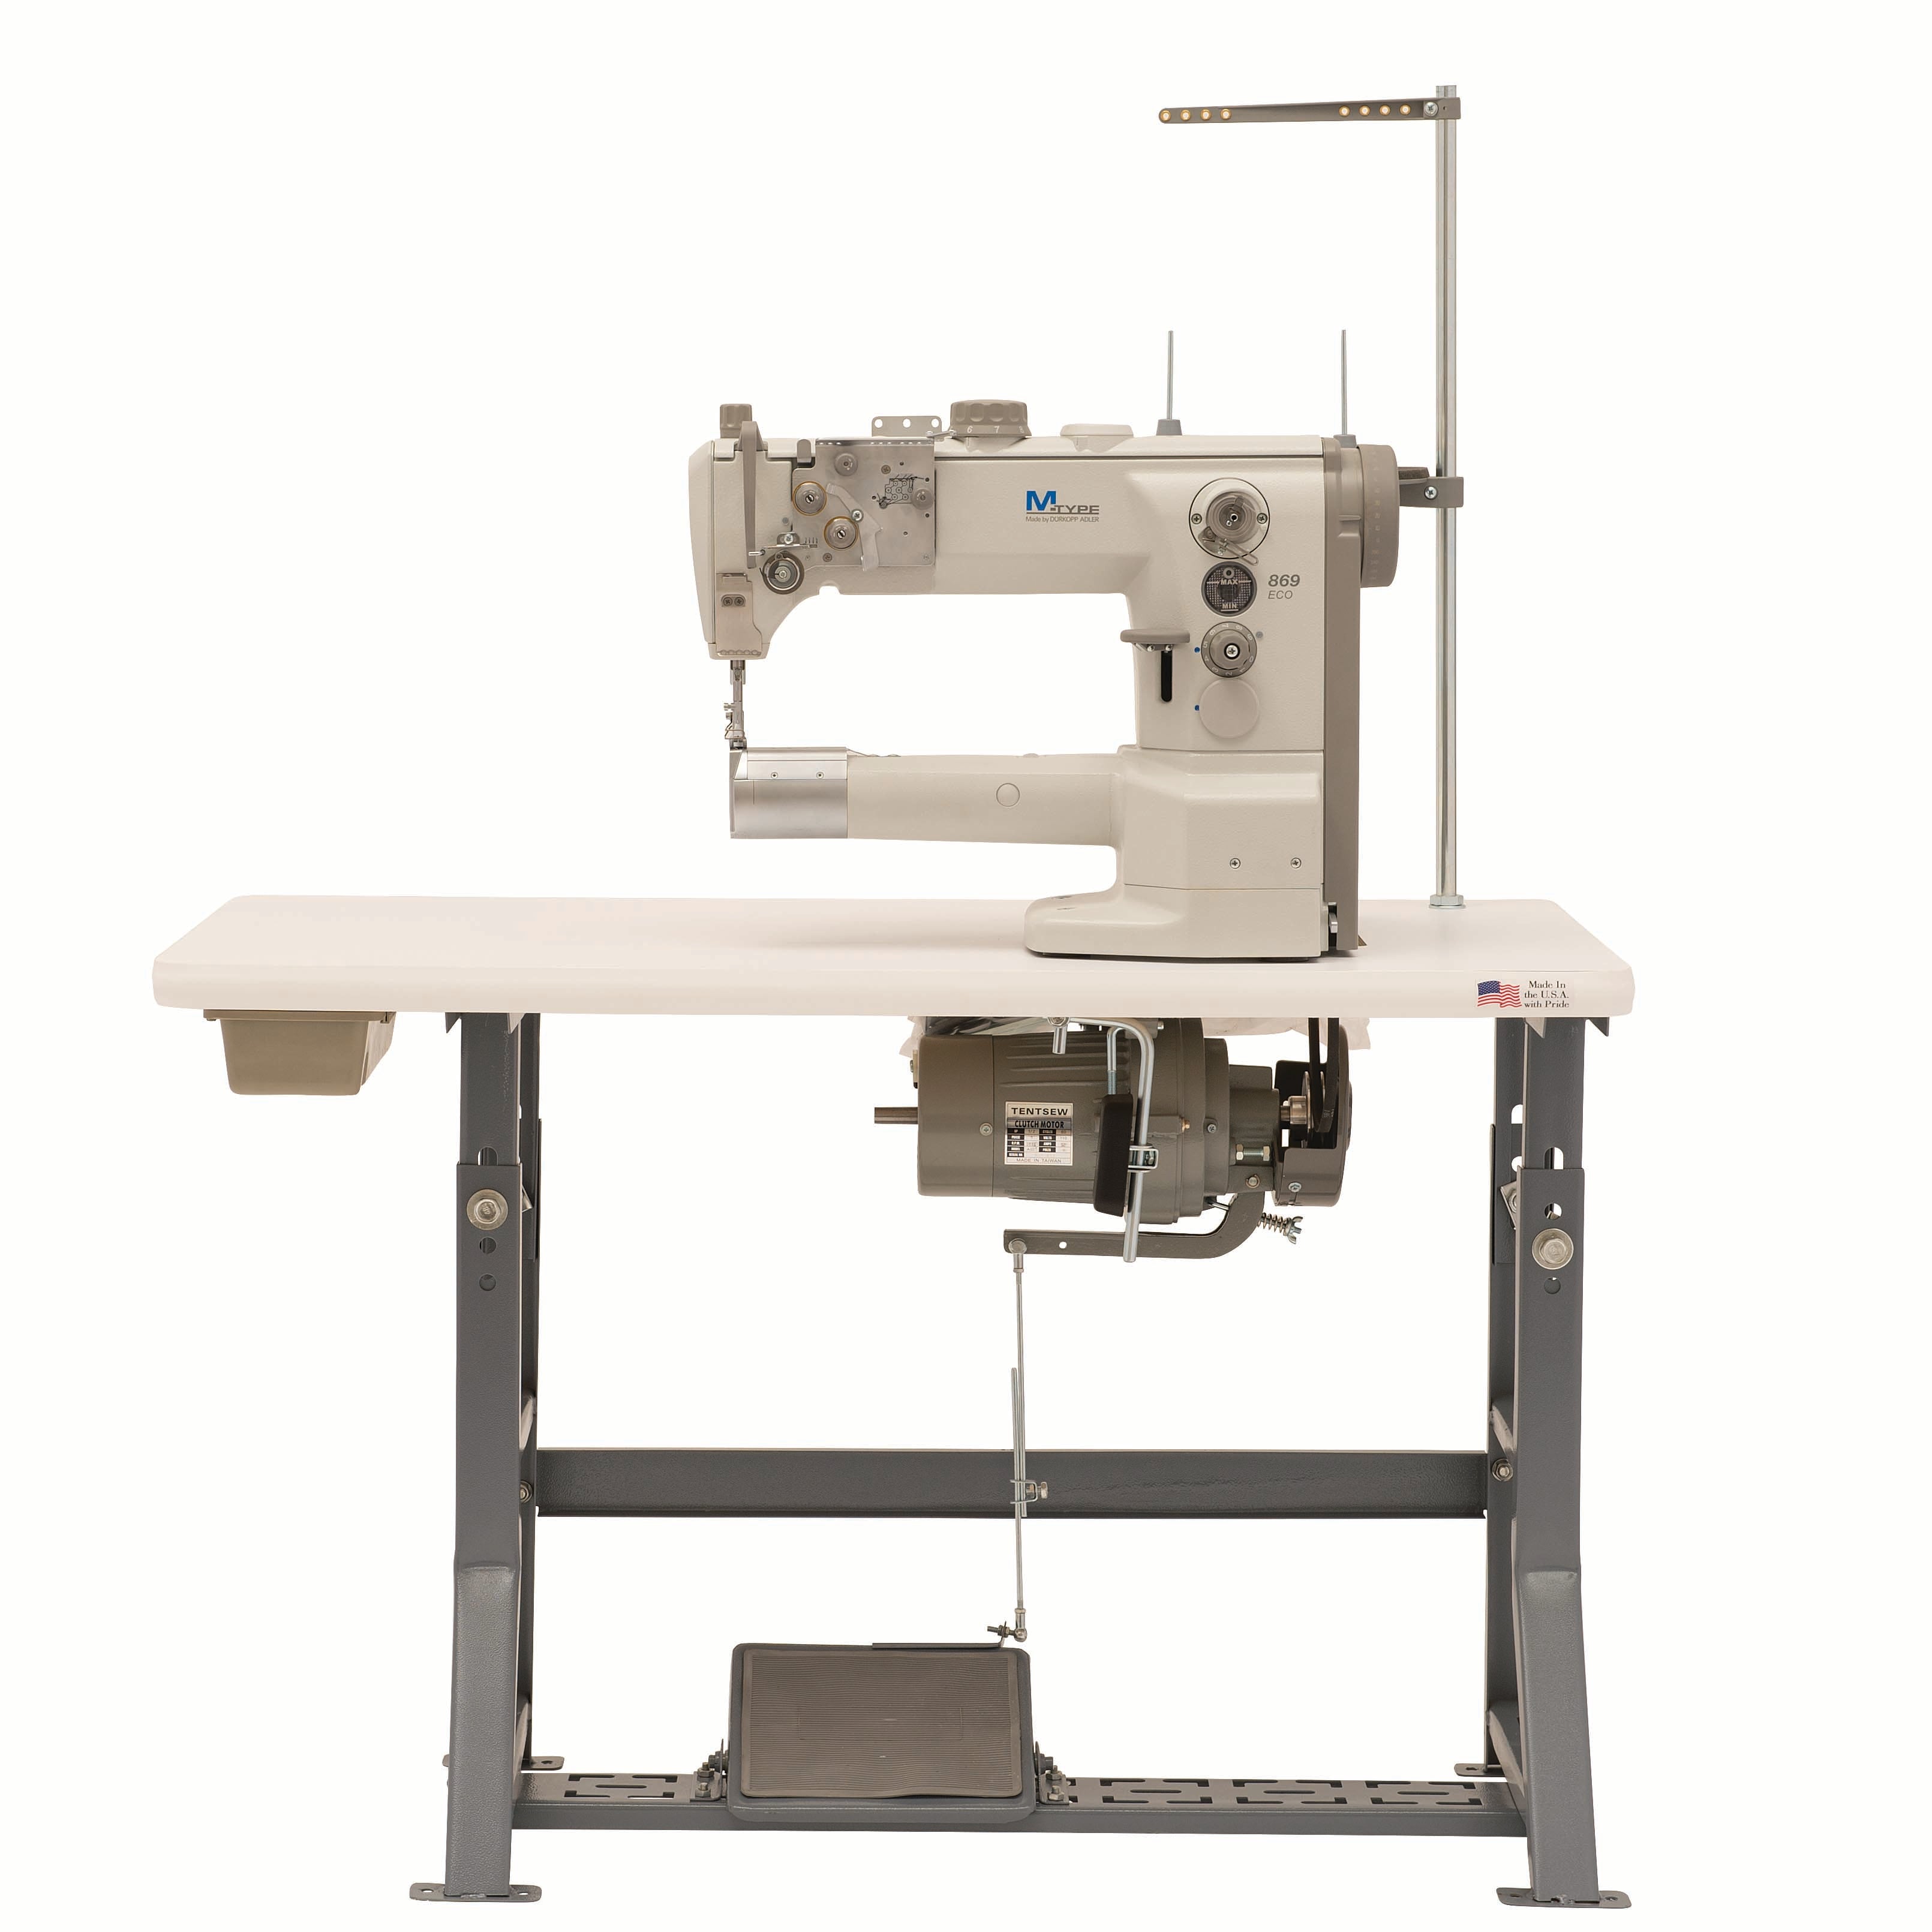 Adler 869 Cylinder Arm Sewing Machine, Complete with Stand